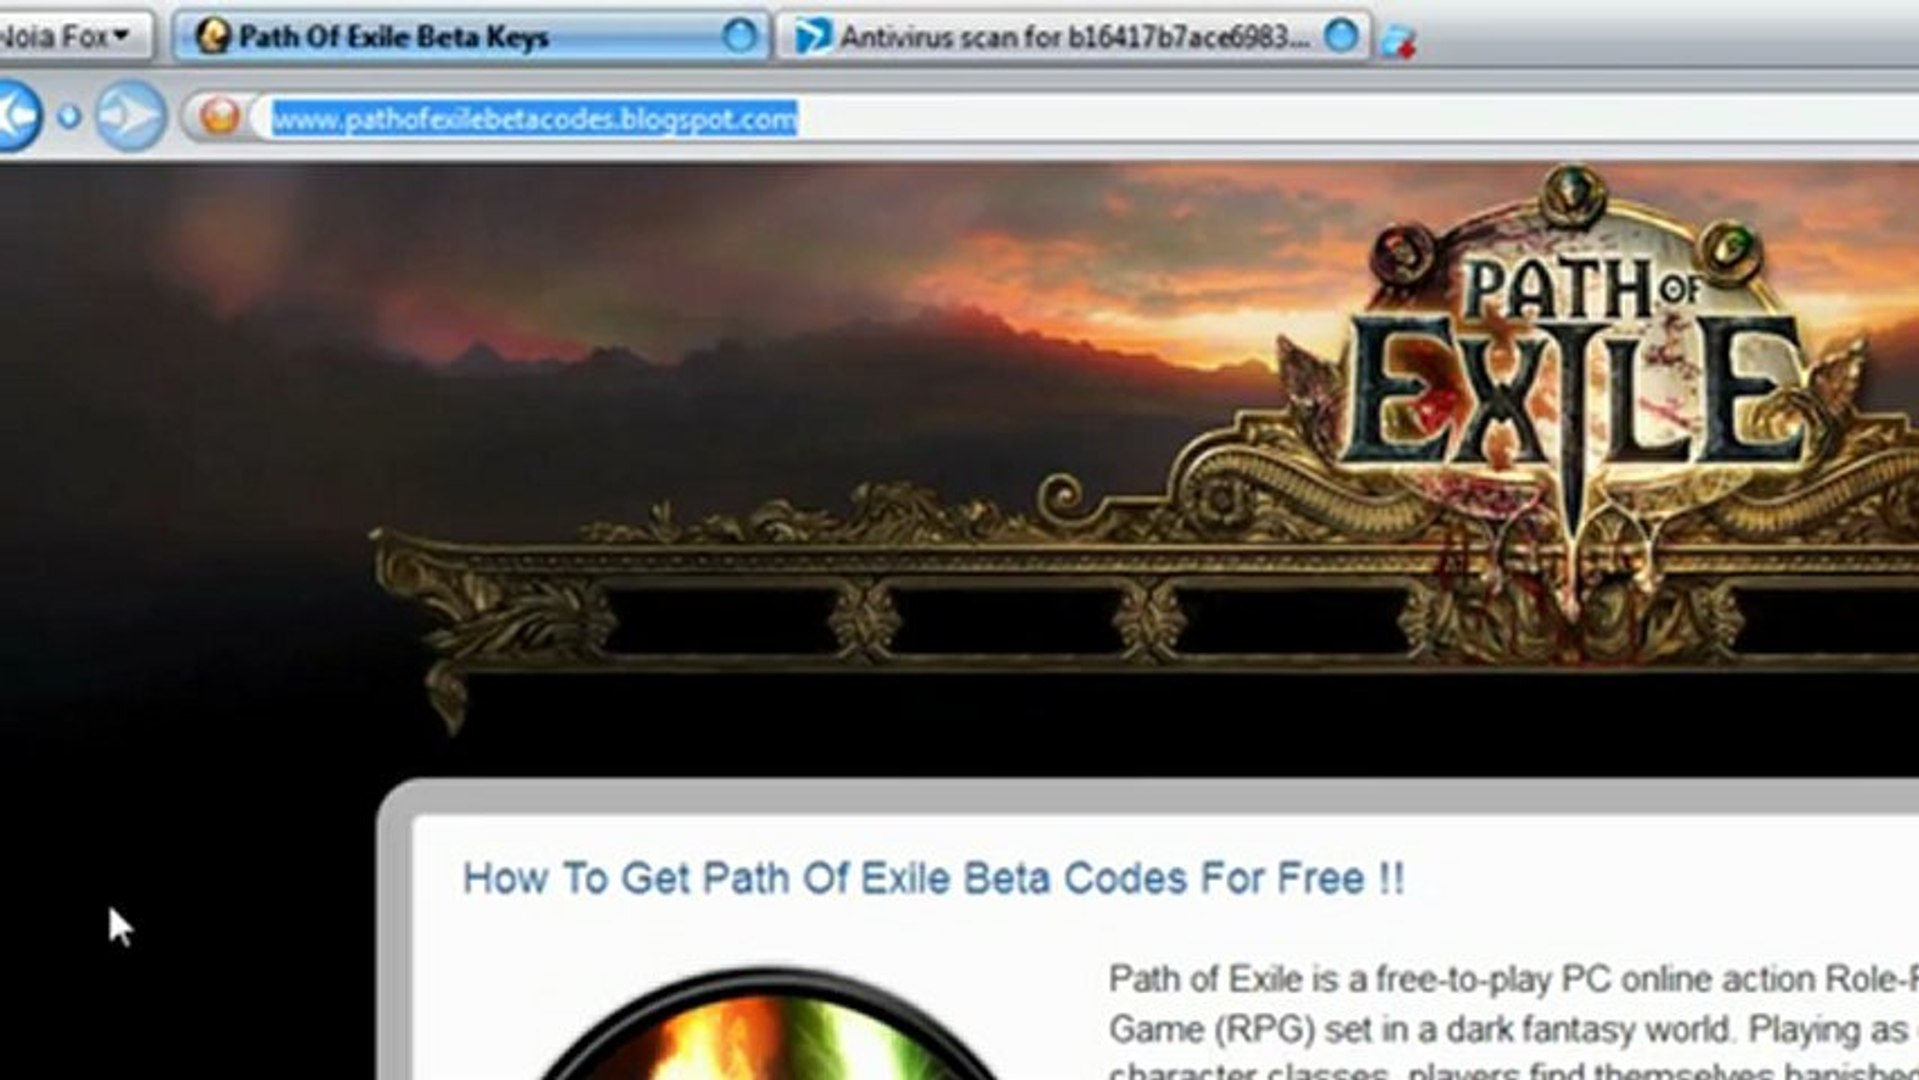 â�£Get Path Of Exile Beta Codes For Free